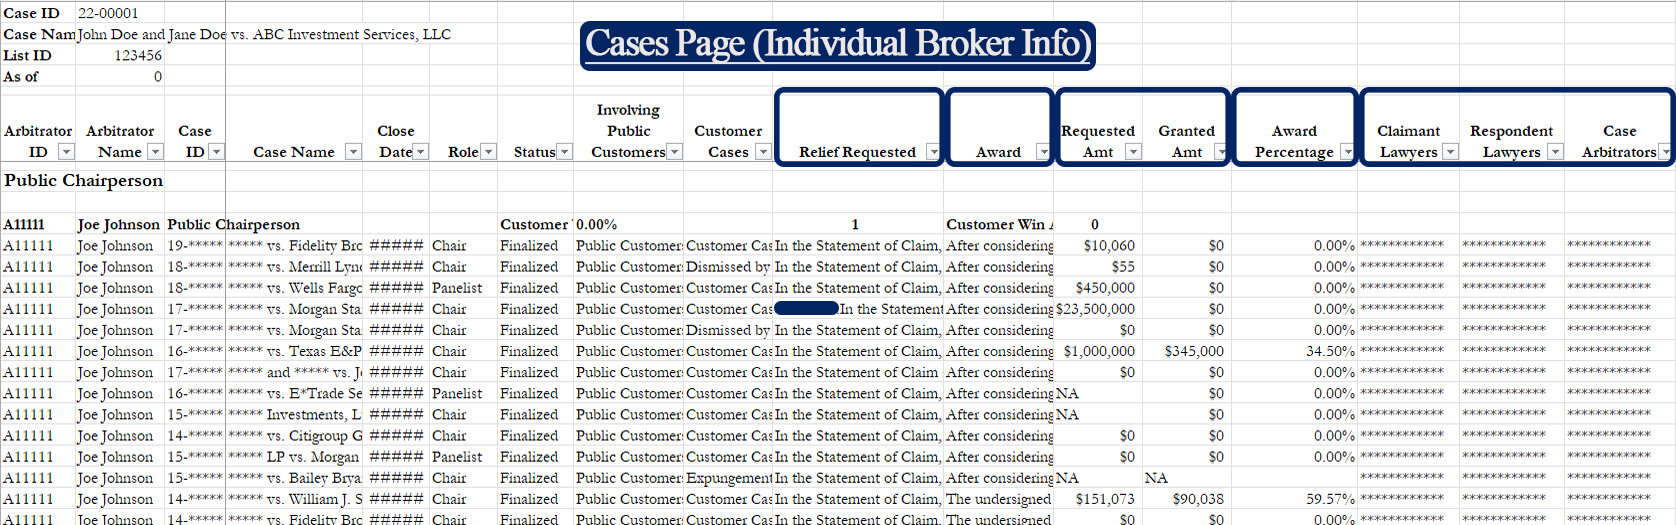 A screenshot showing a preview of the cases page of our arbitrator ranking excel file.